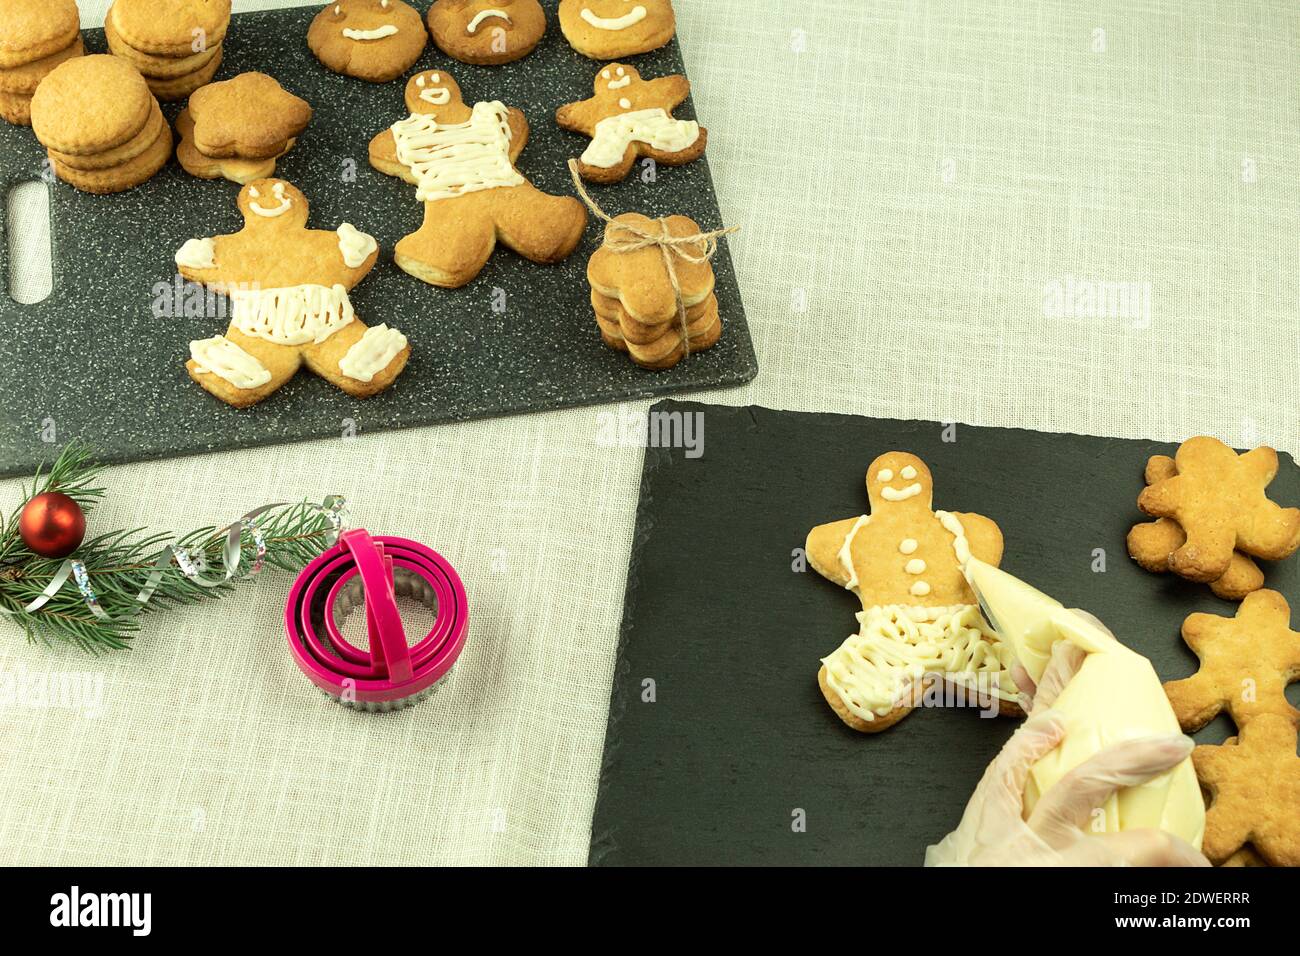 The girl applies cream to Christmas cookies. Decorating Christmas cookies with a pastry bag. Girl decorates cookies with interest Stock Photo